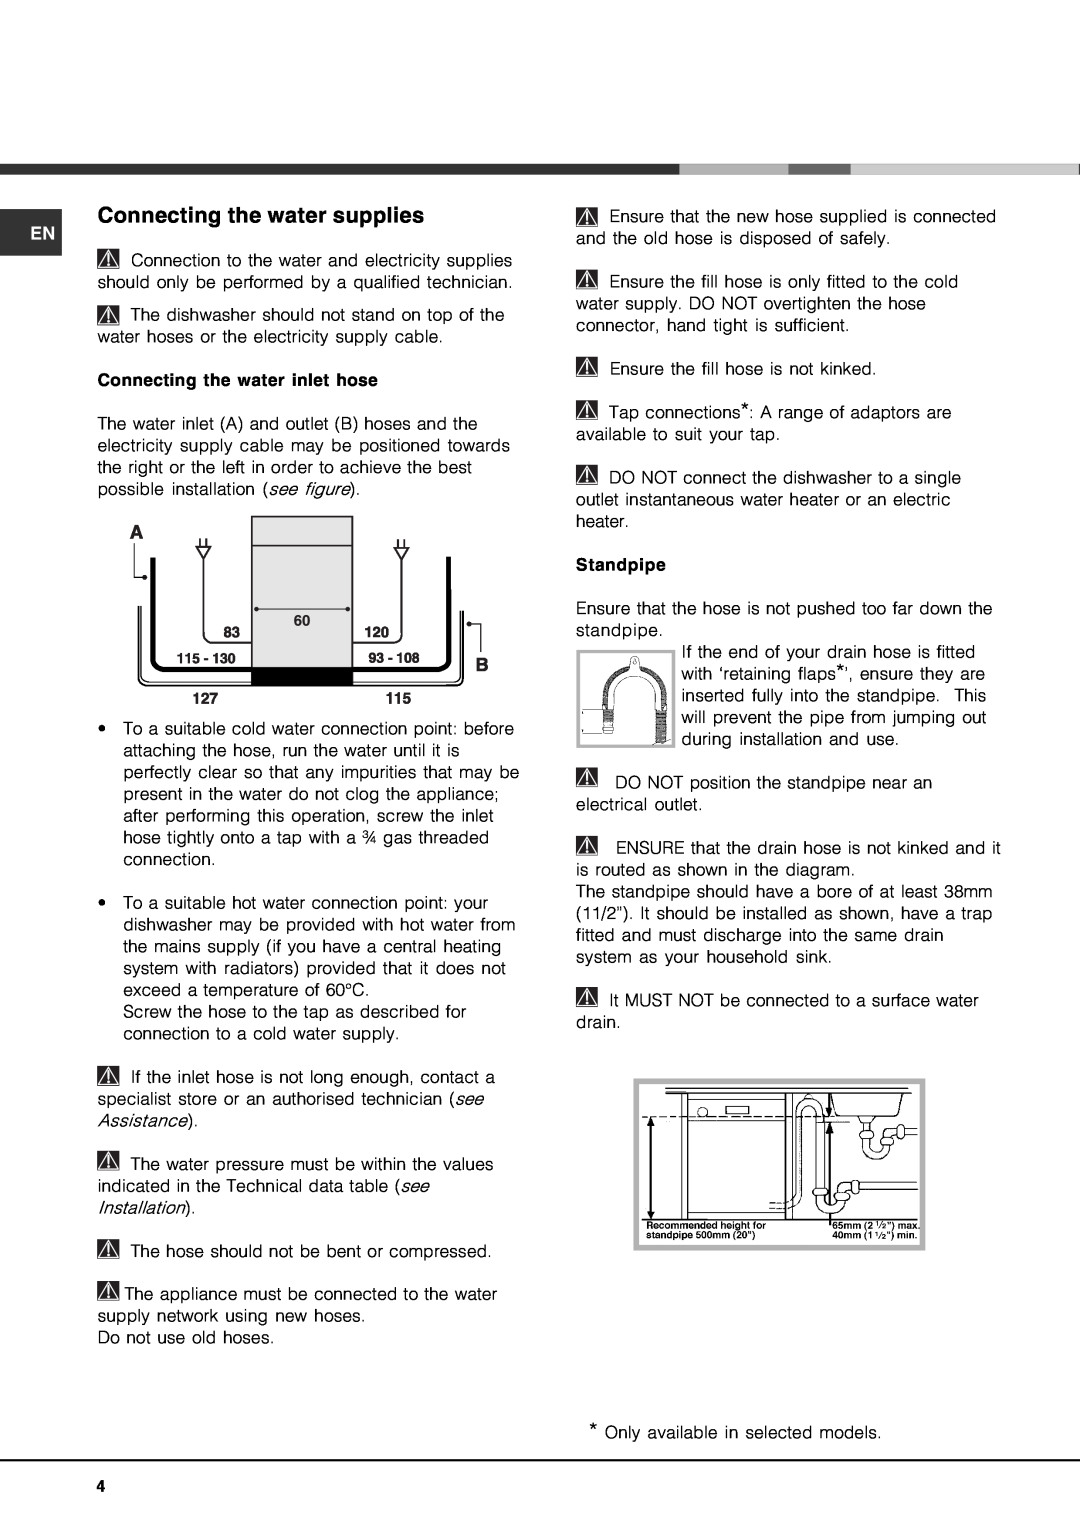 Hotpoint LFT 228 manual Connecting the water supplies 